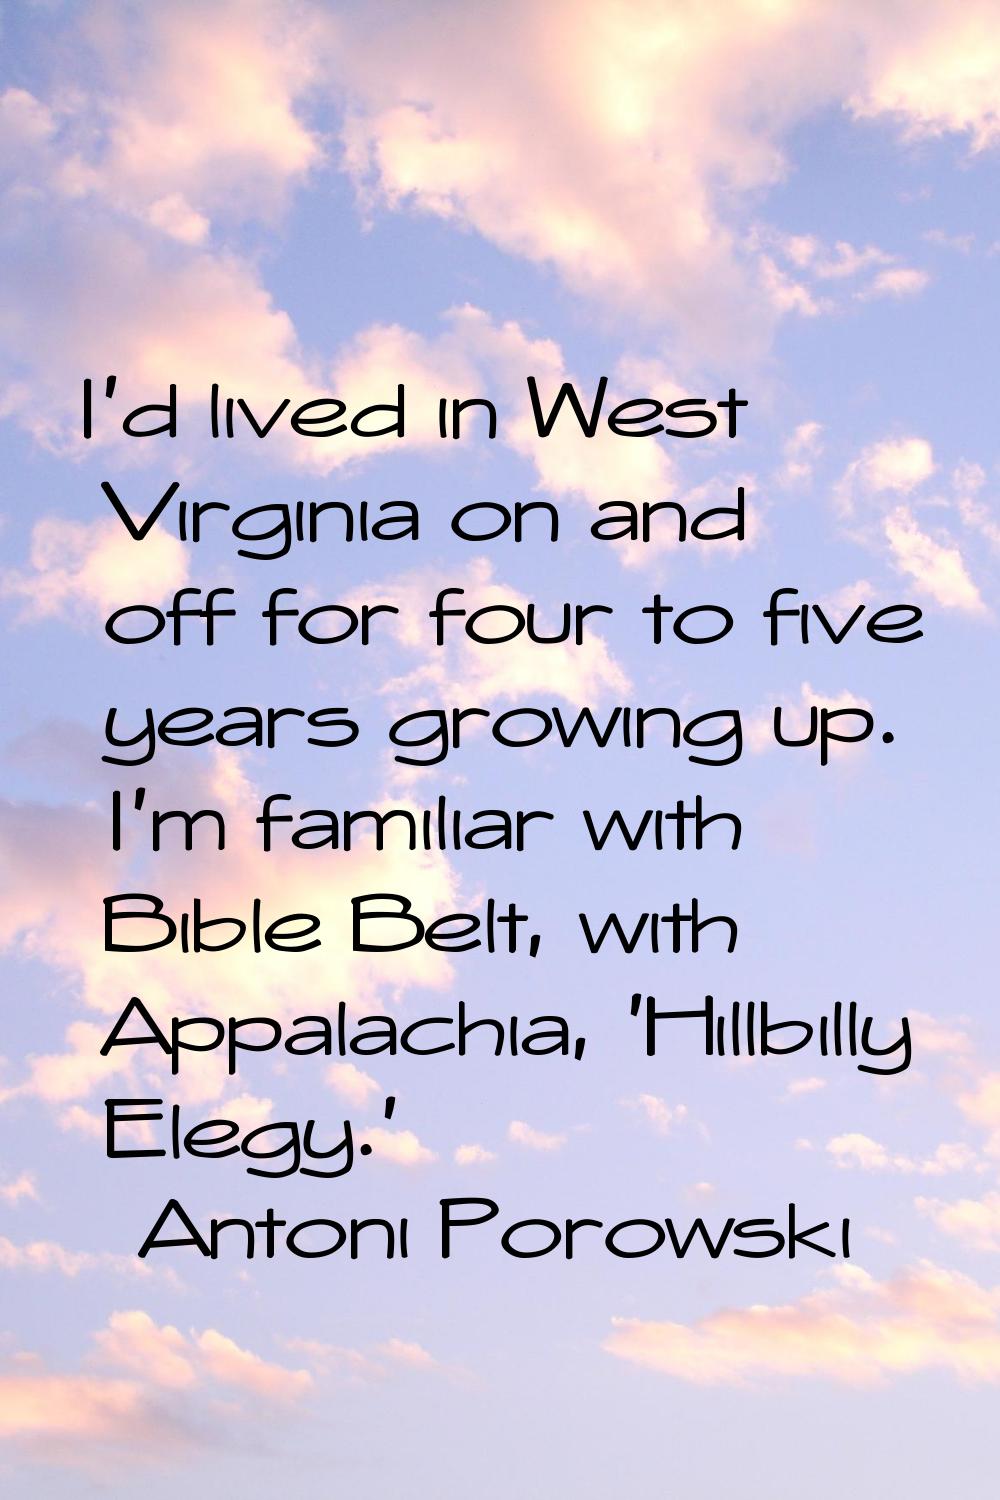 I'd lived in West Virginia on and off for four to five years growing up. I'm familiar with Bible Be